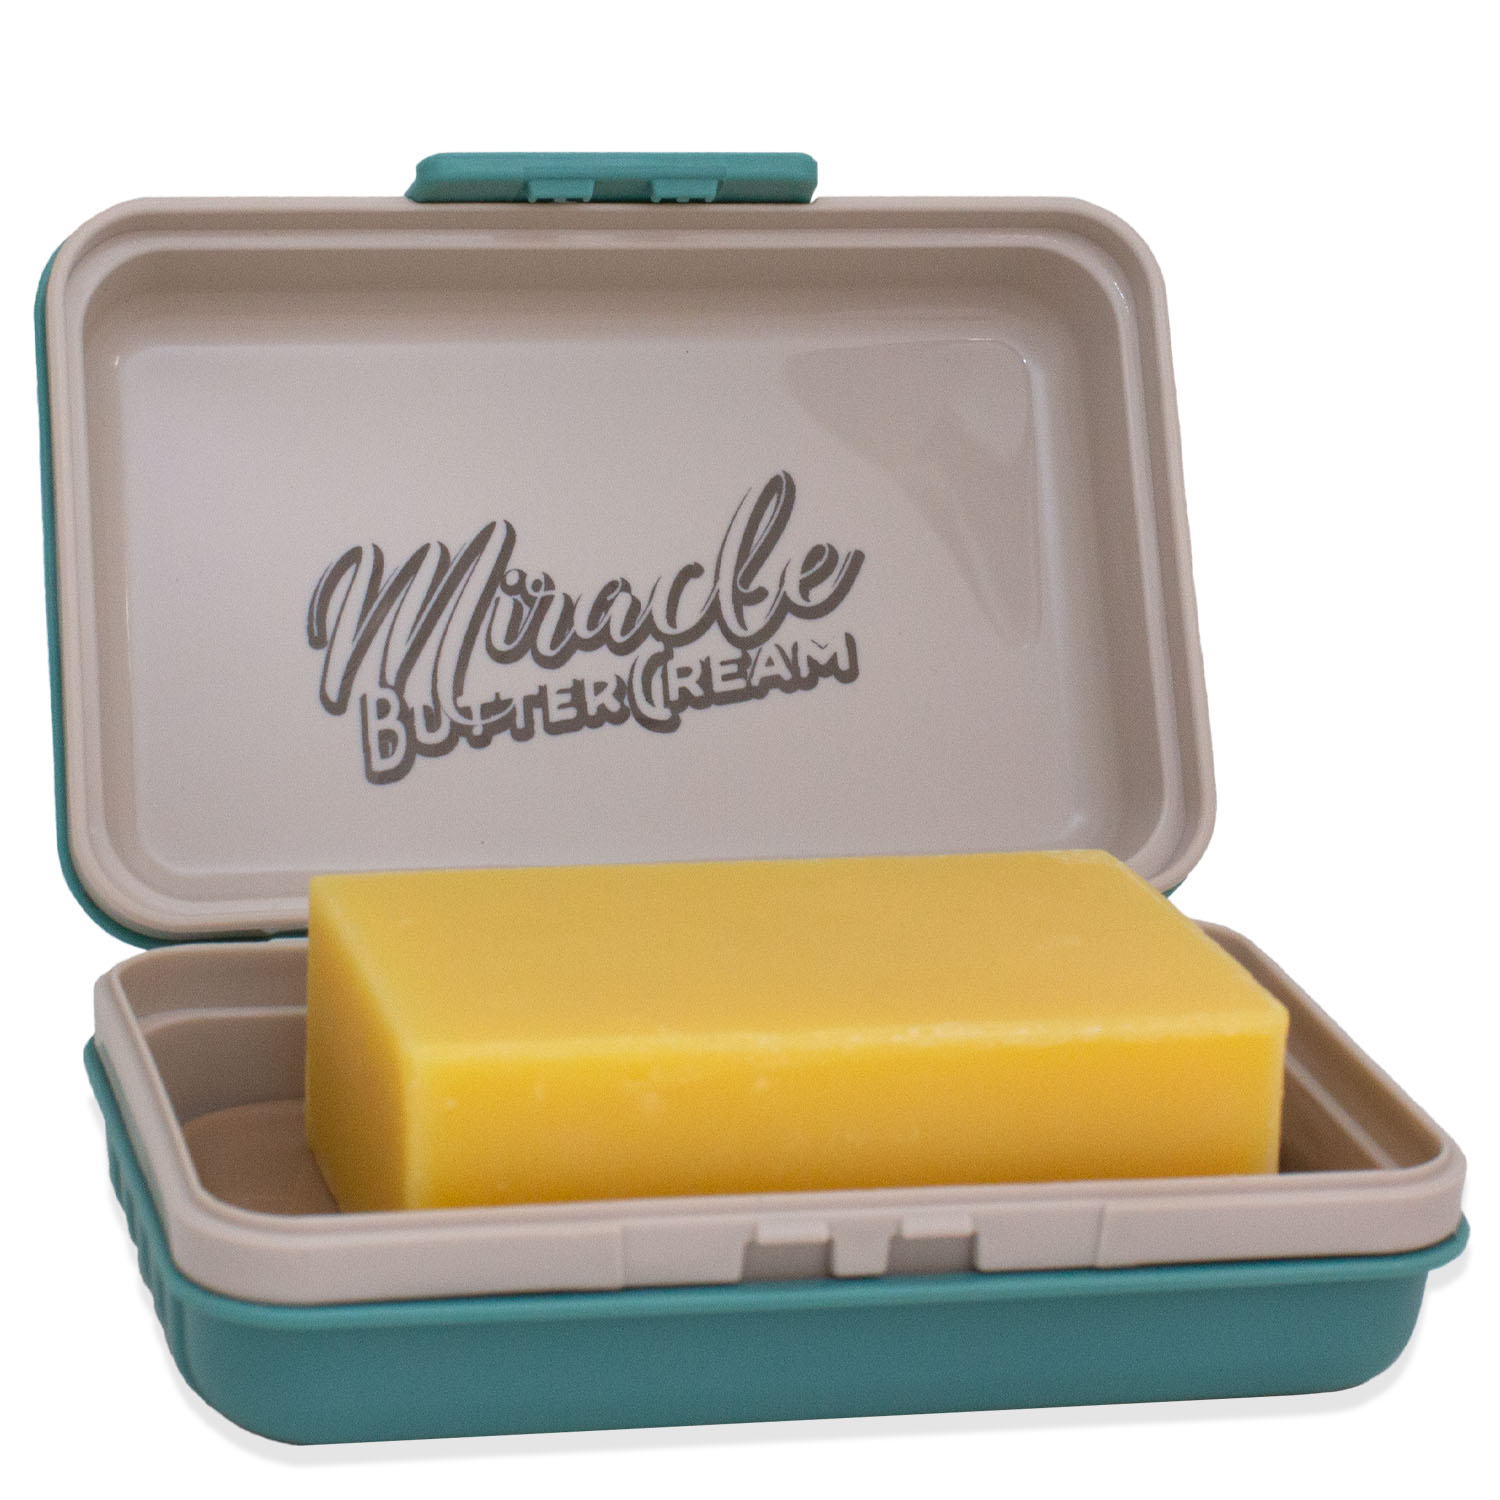 Miracle Butter Cream Soap Box, miraclebuttercream.com, soap is not included